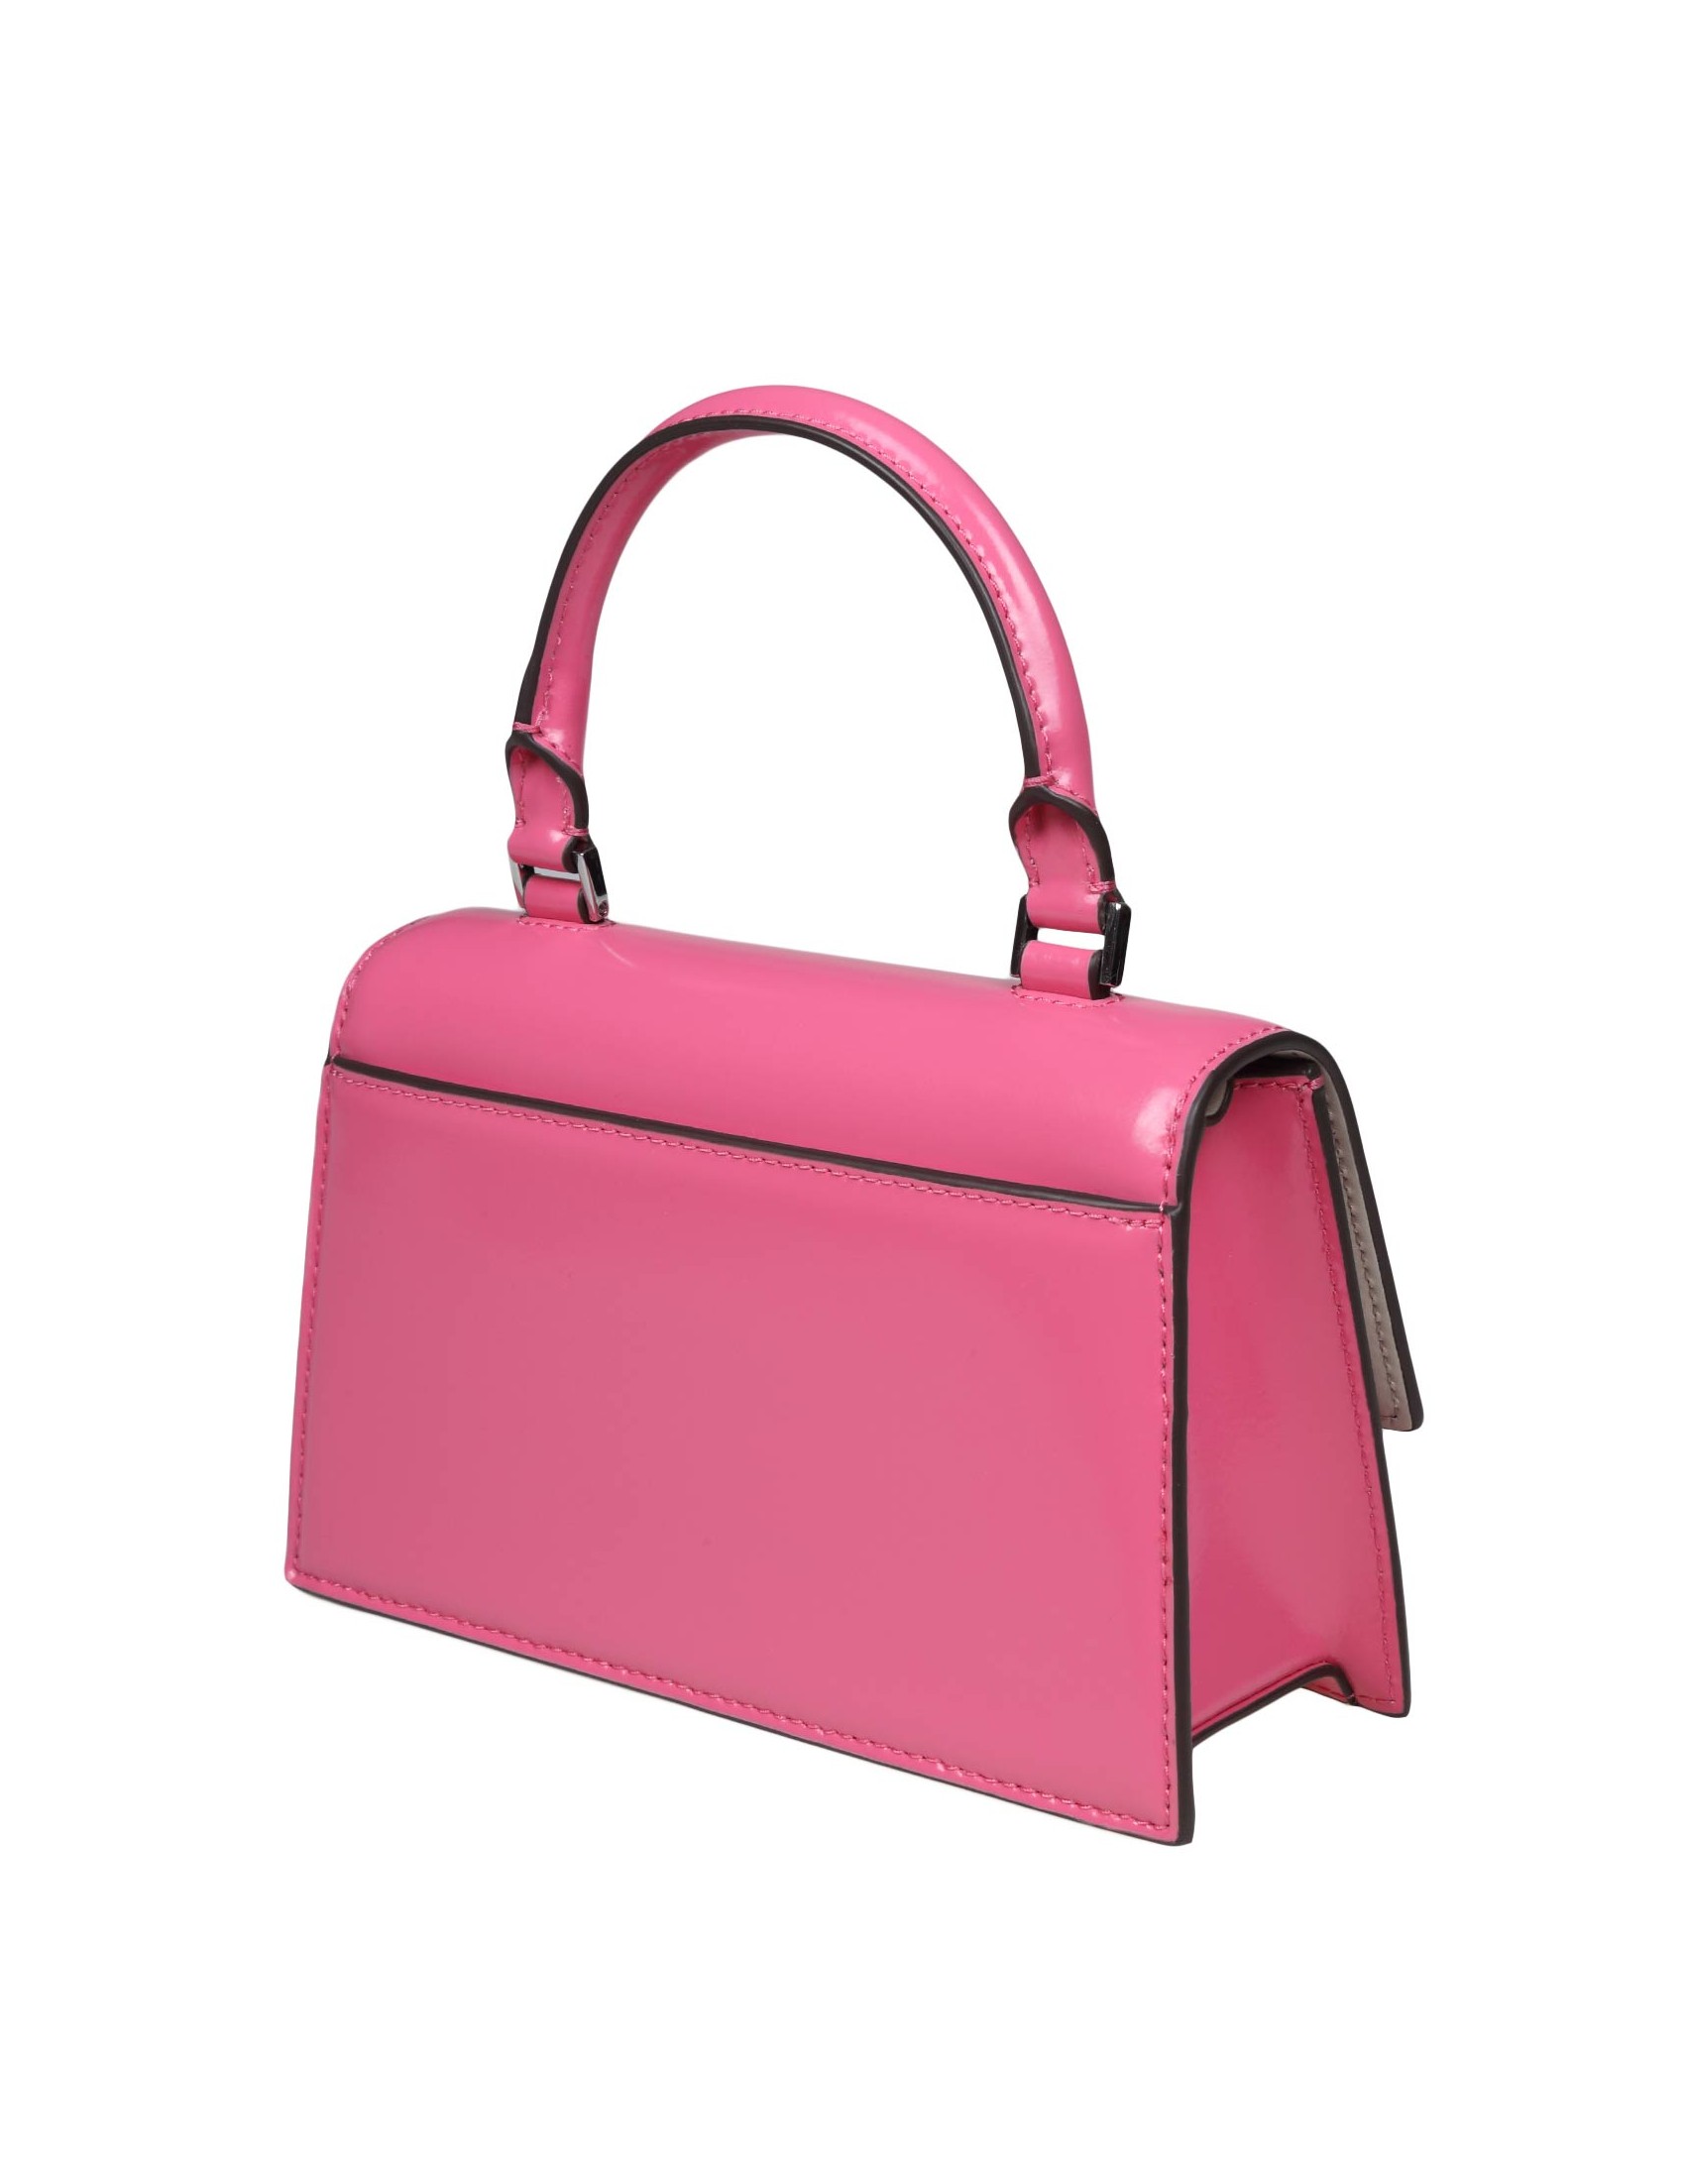 TORY BURCH MINI TOP HANDLE BAG IN PINK LEATHER